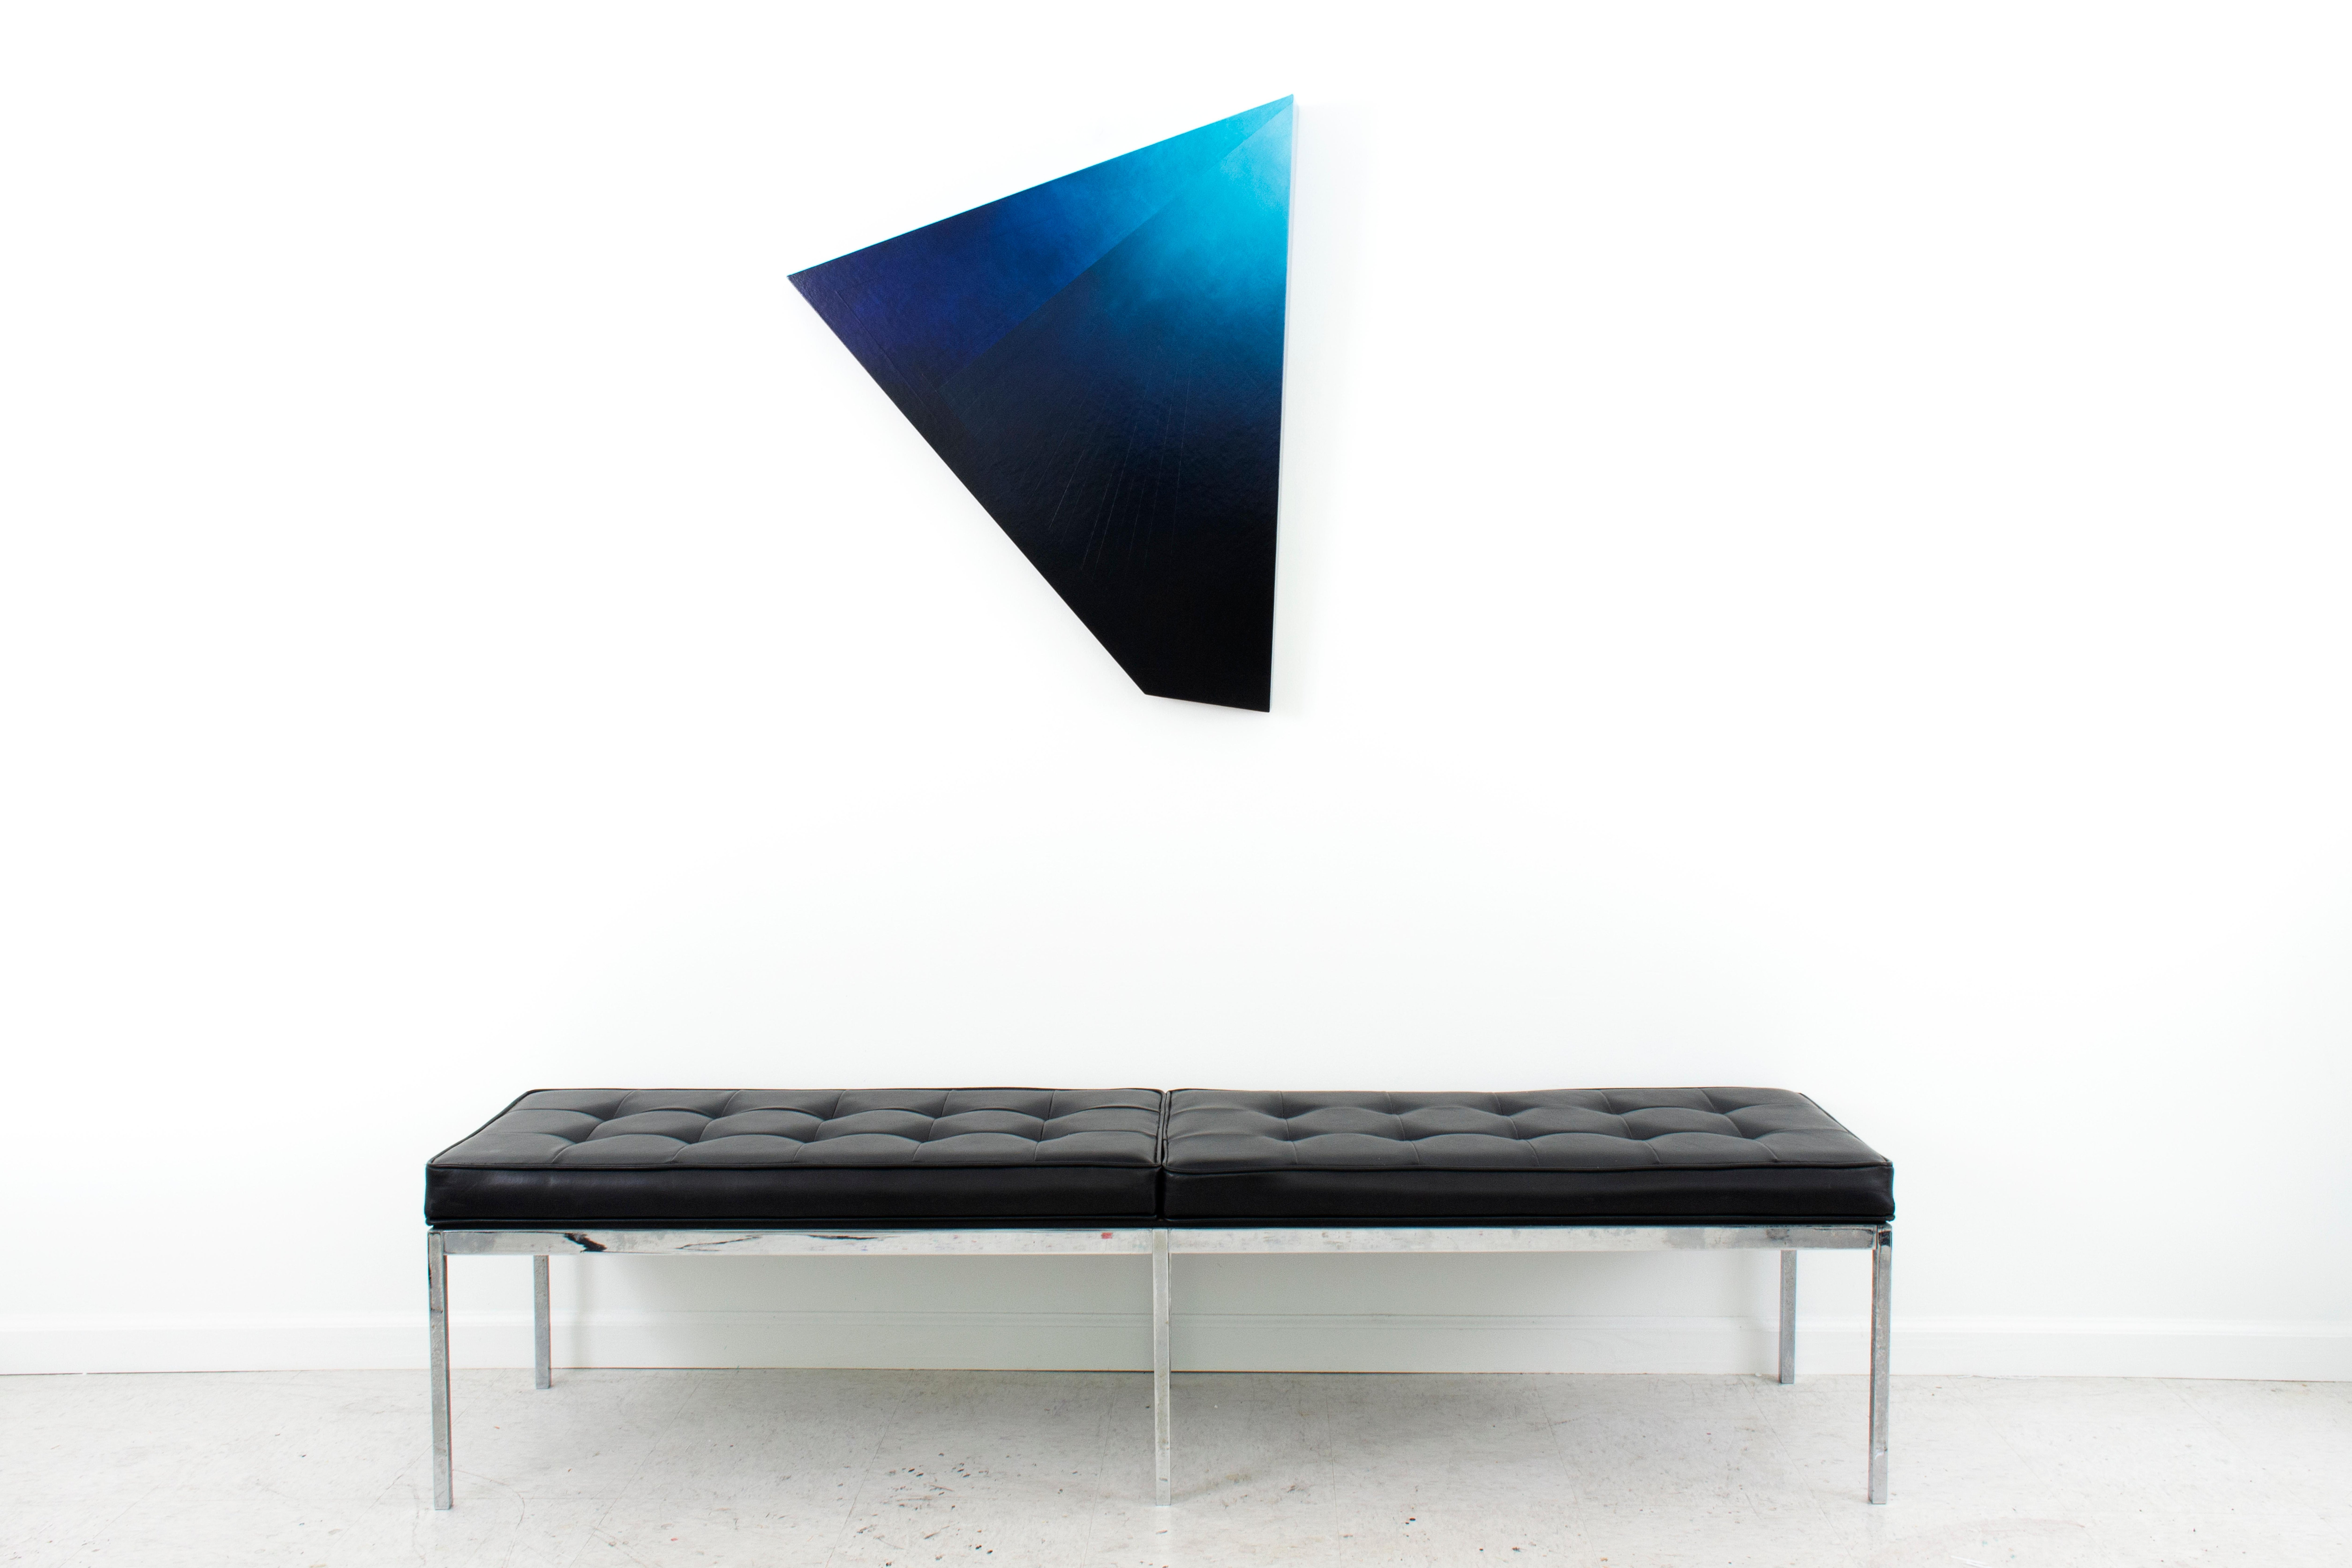 LA VIE DE SIRéNE - Geometric Wall Hanging/Sculpture in Acrylic & Wood Panel - Contemporary Painting by Brandon Woods